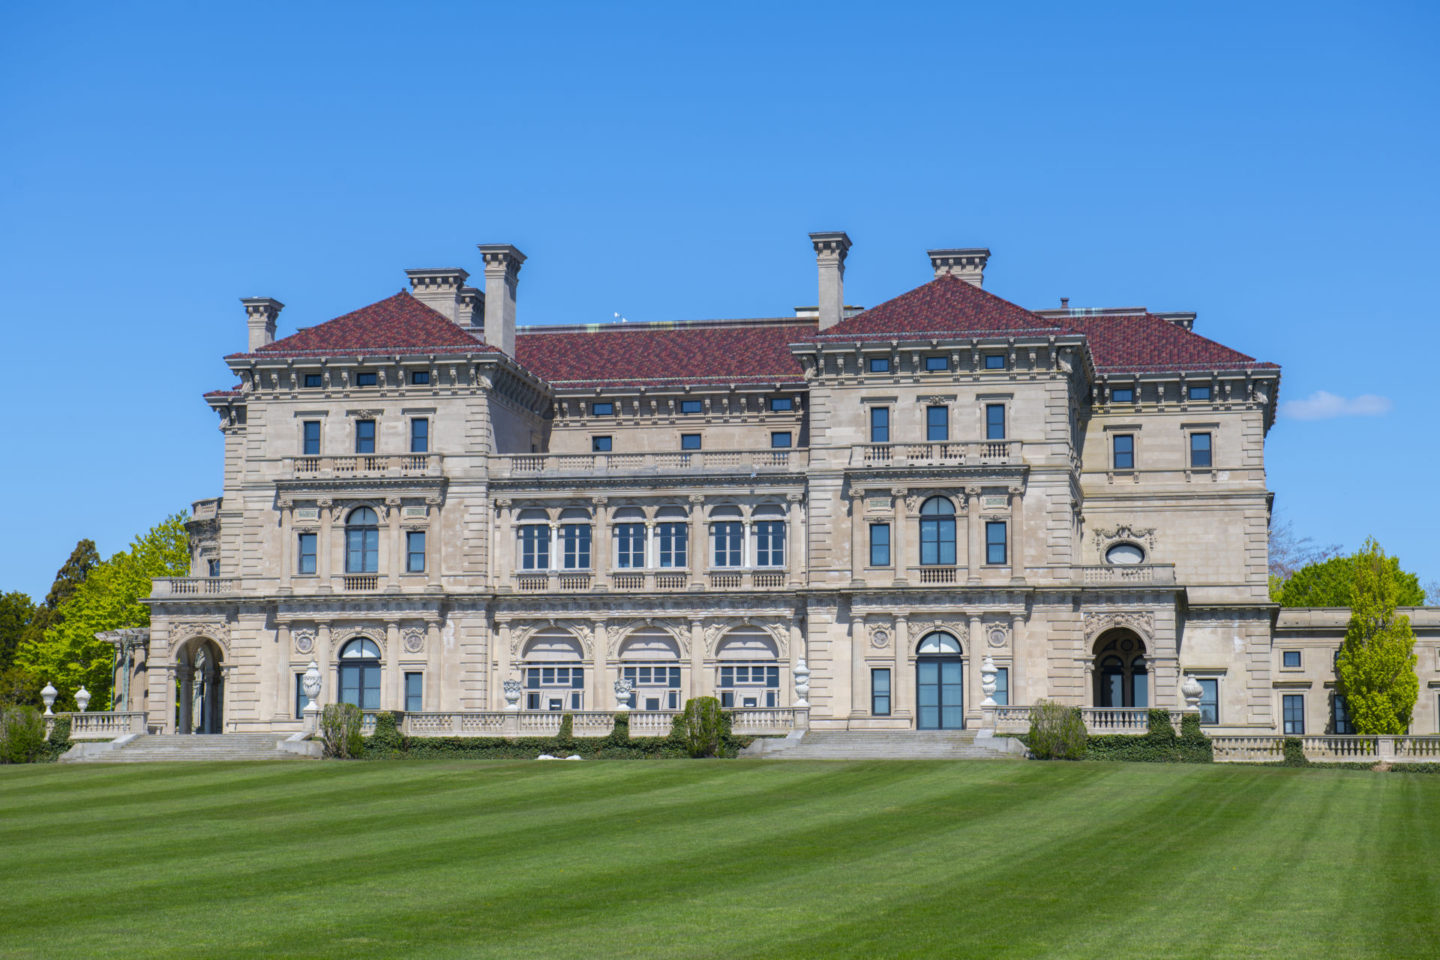 Front view of the beautiful and famous Breakers Mansion in Newport, Rhode Island